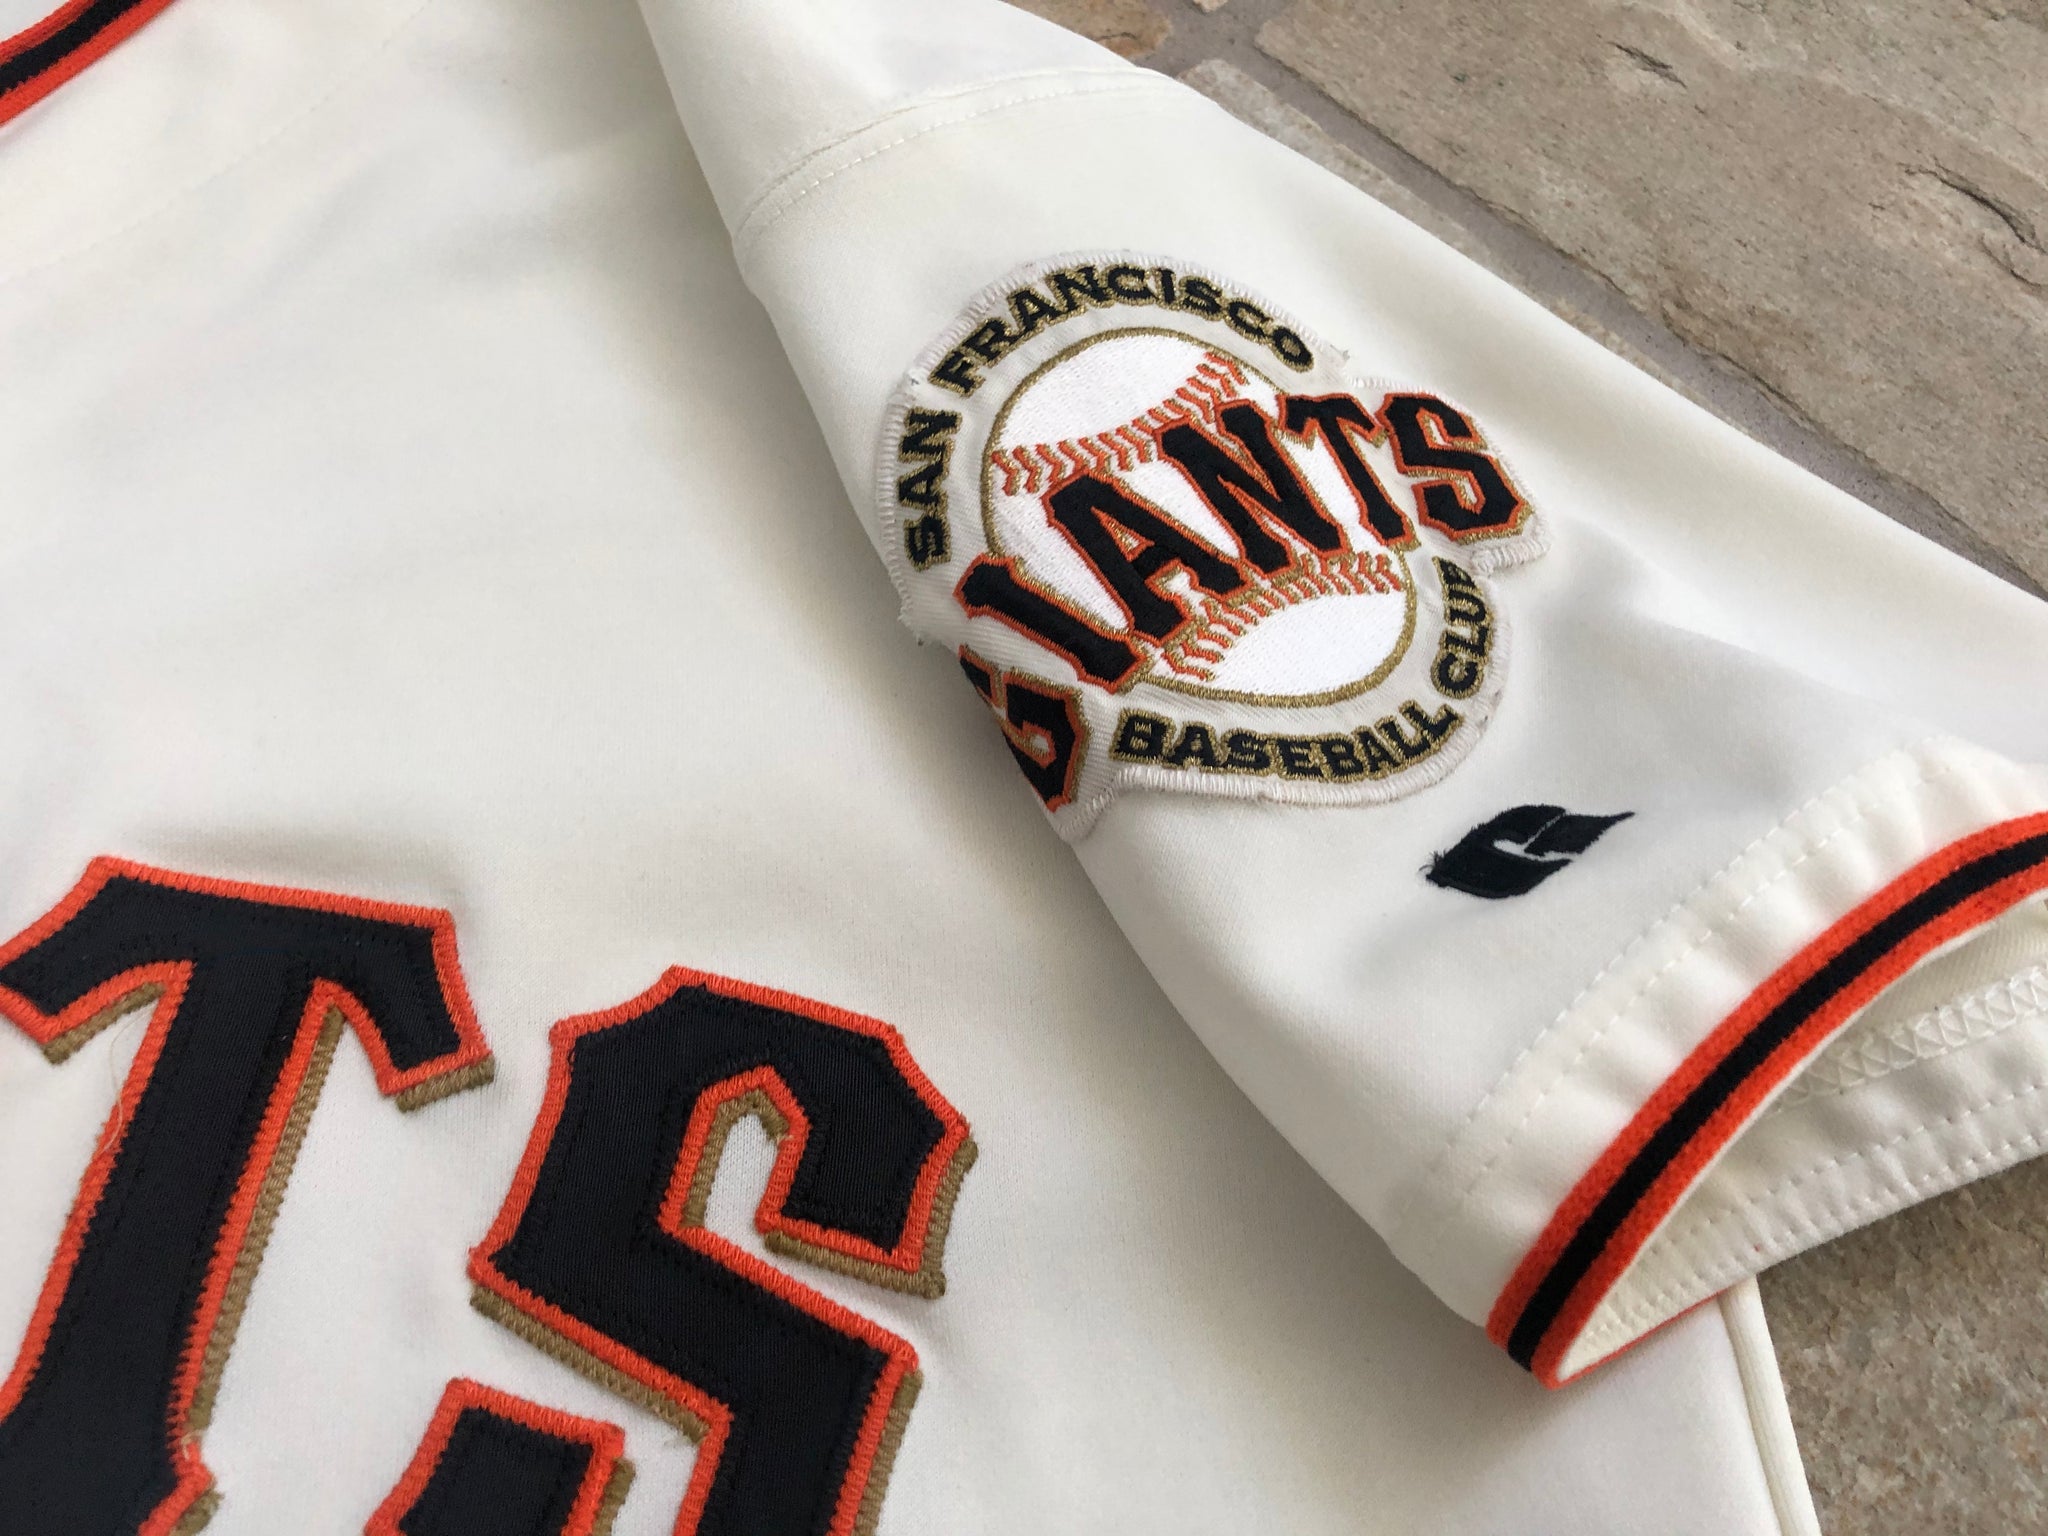 2000-2002 San Francisco Giants Jerseygiants Russell Authentic 